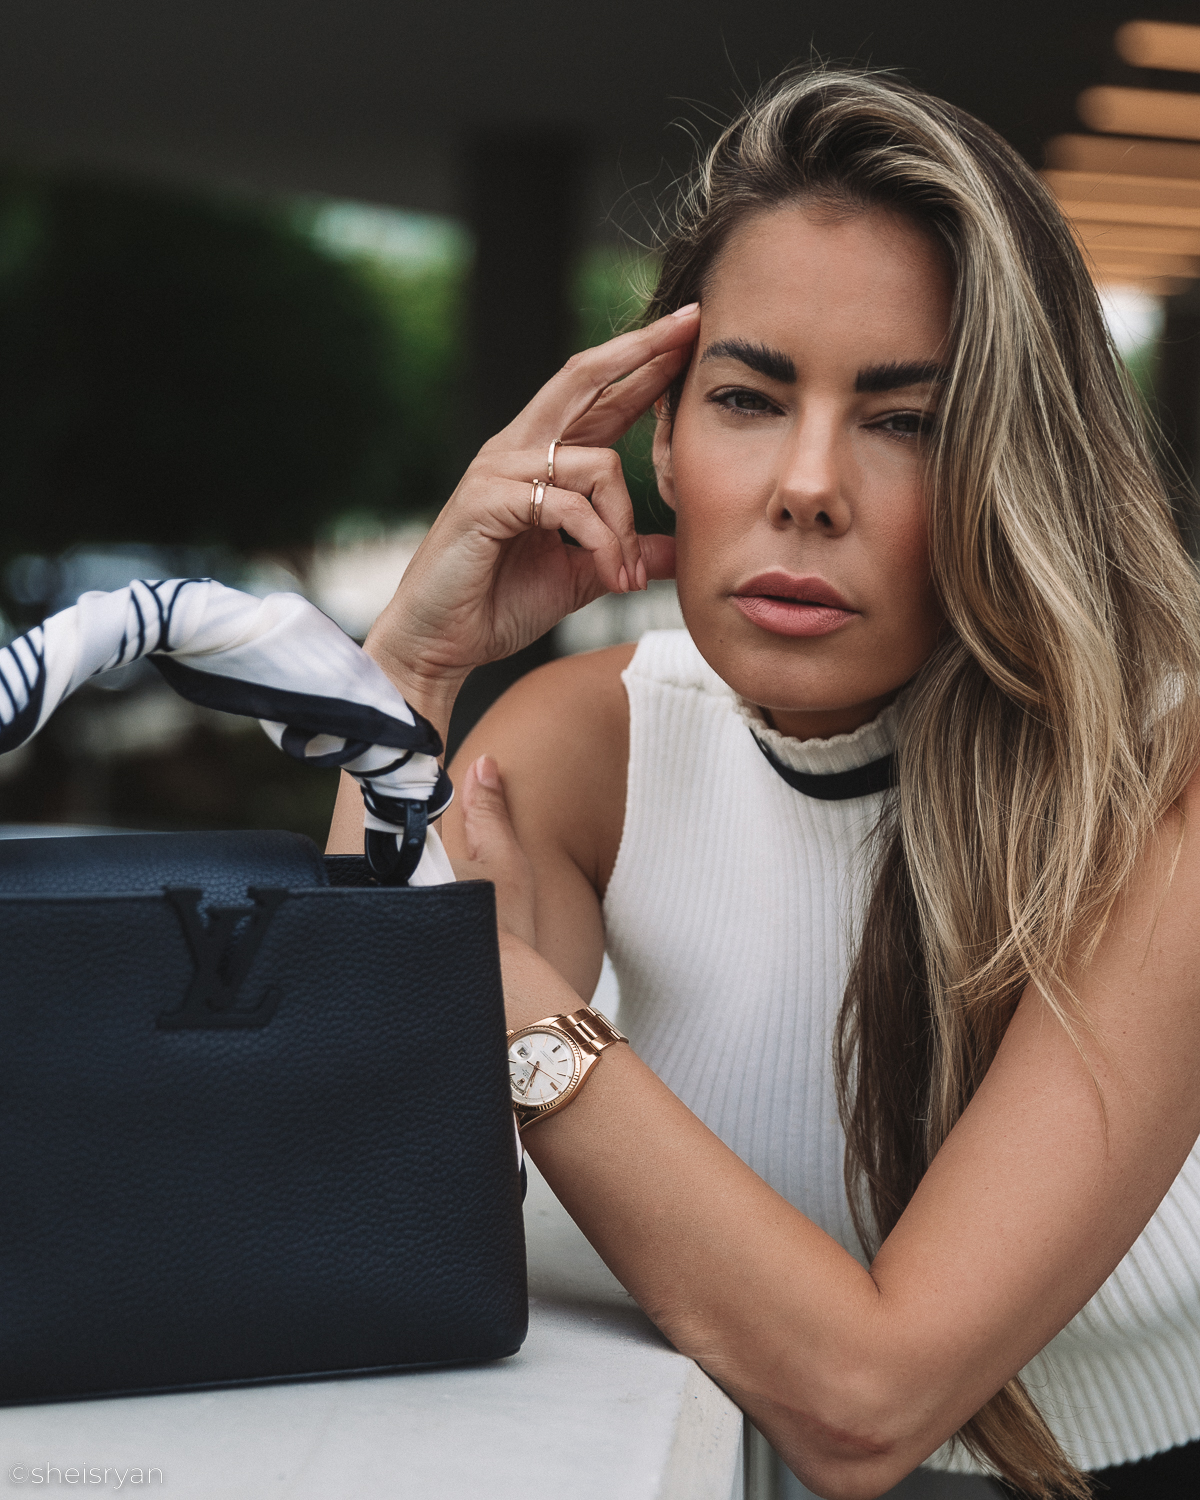 Luxury Accessories Worth Investing In She is Ryan